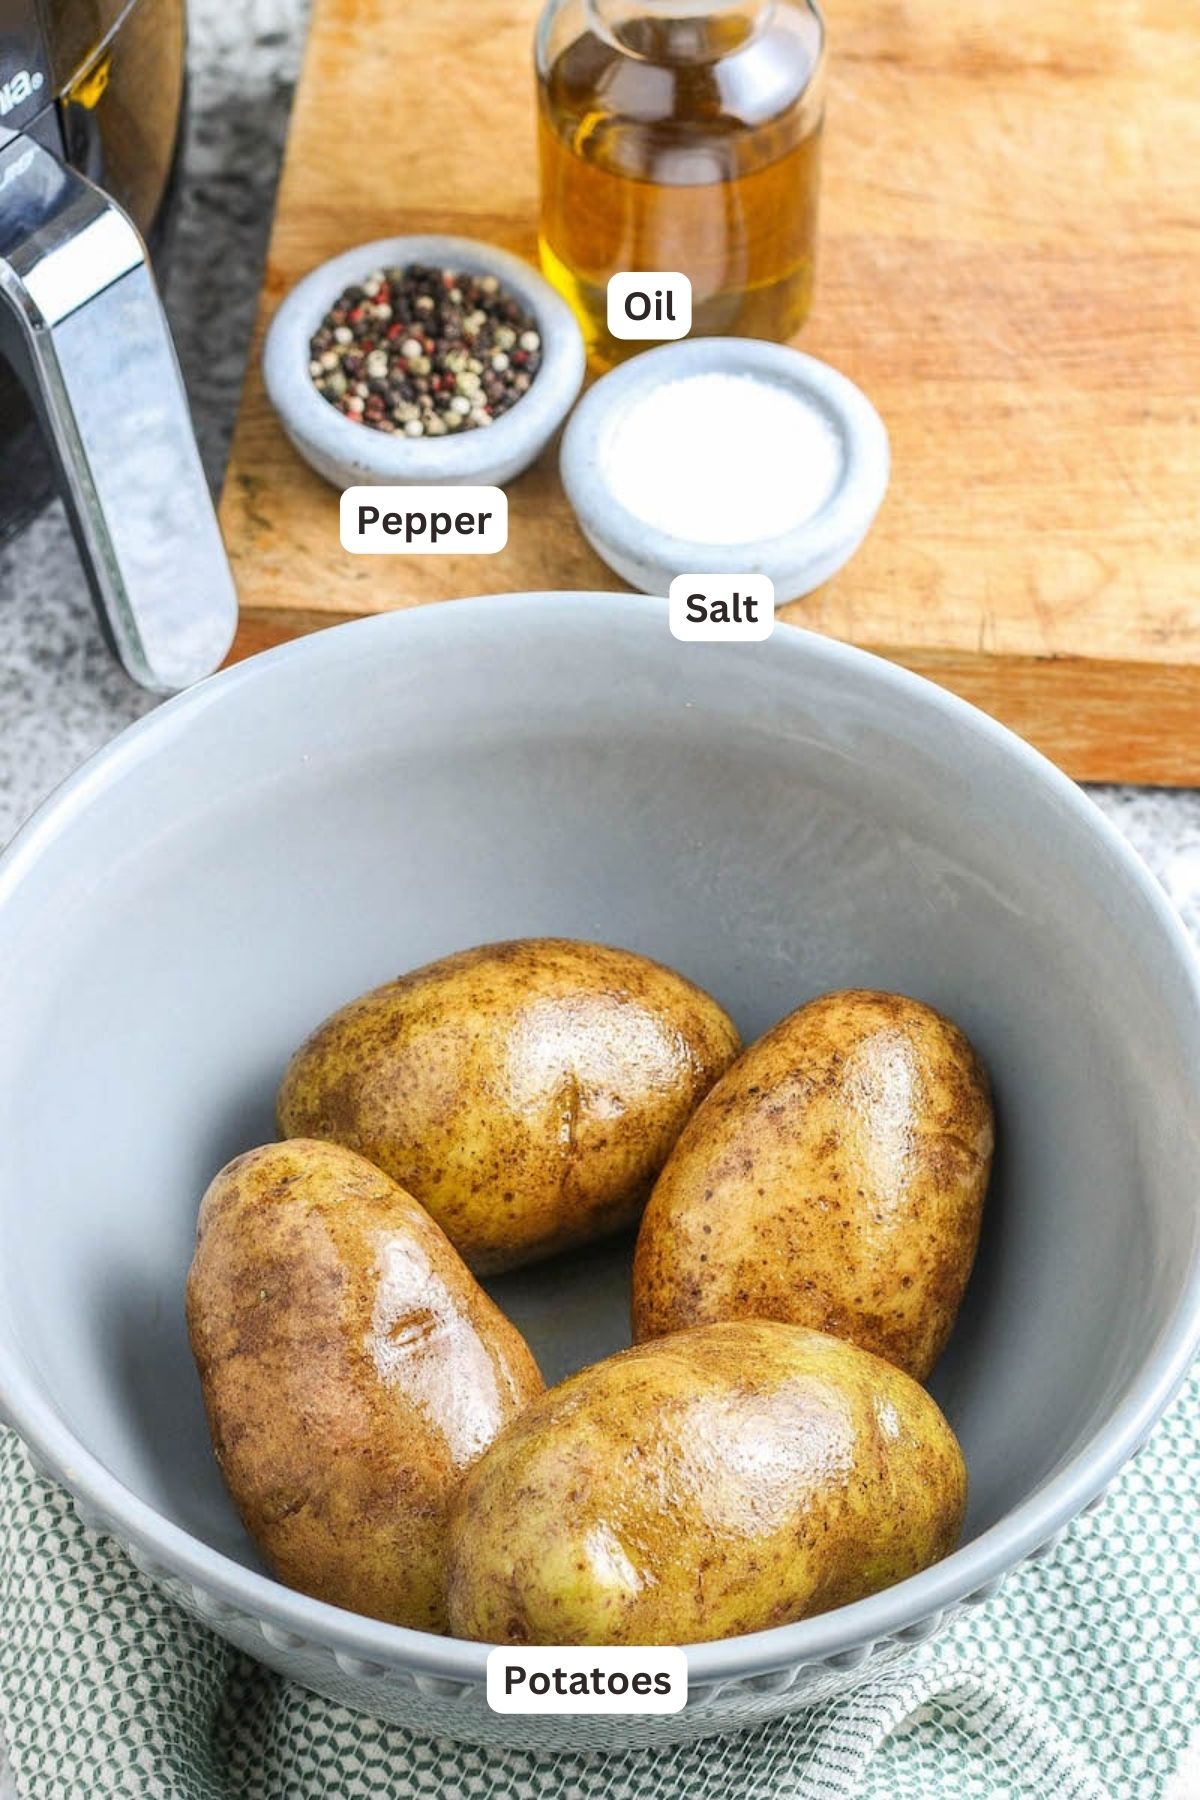 Ingredients for Air Fryer Baked Potatoes recipe.